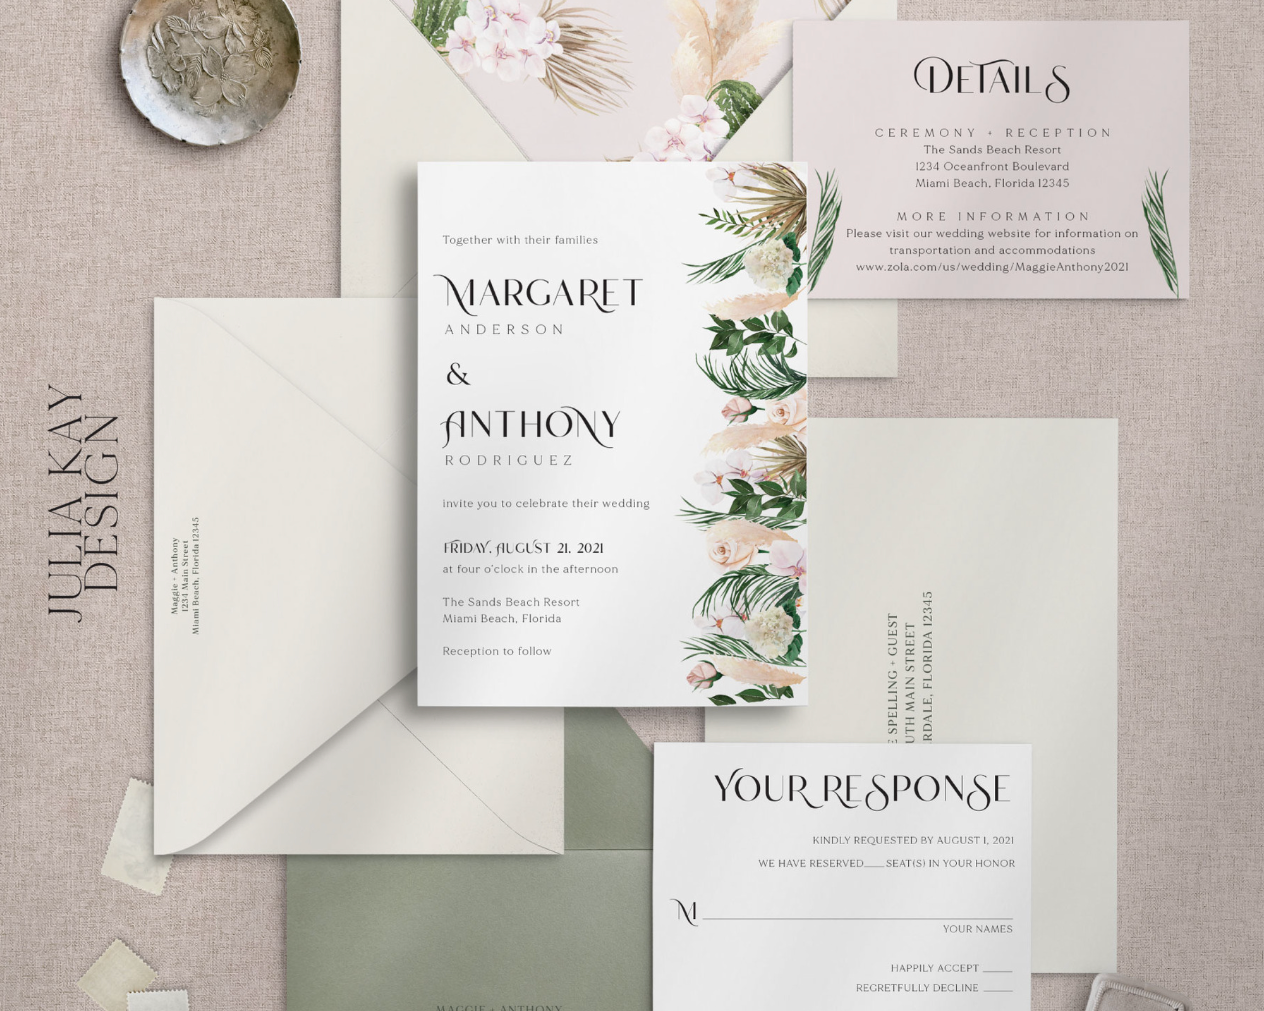 Along for the Tide: Nautical-Inspired Elegance for Your Wedding Invitations